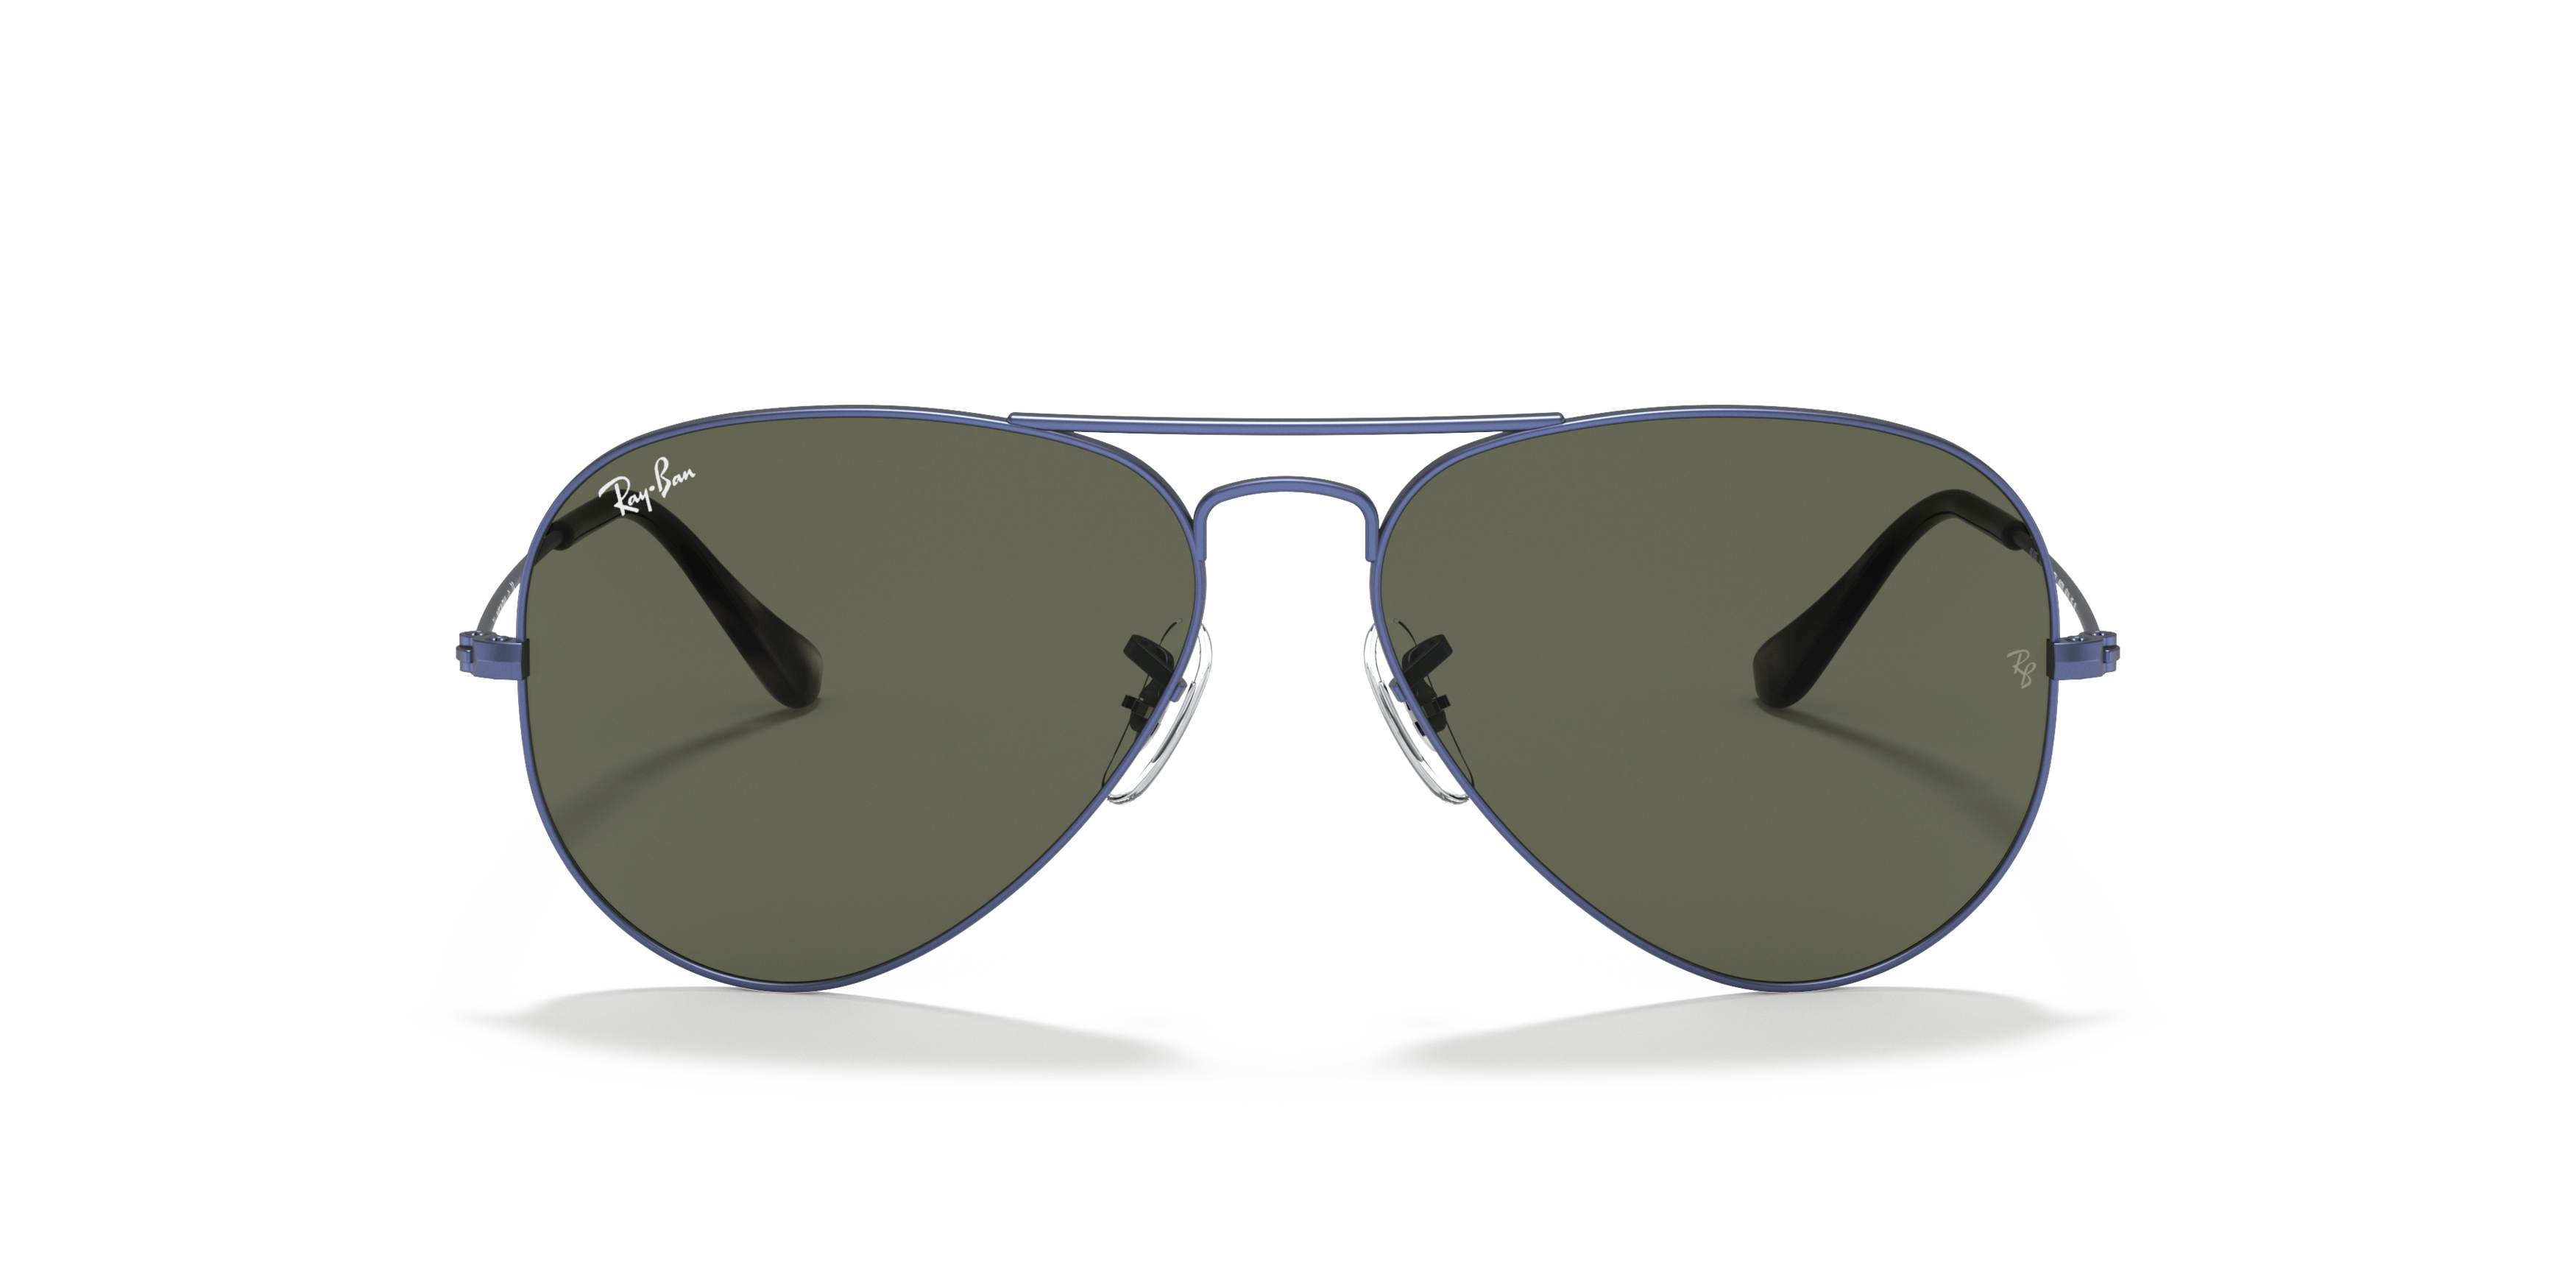 [products.image.front] Ray-Ban Aviator Classic RB3025 918731